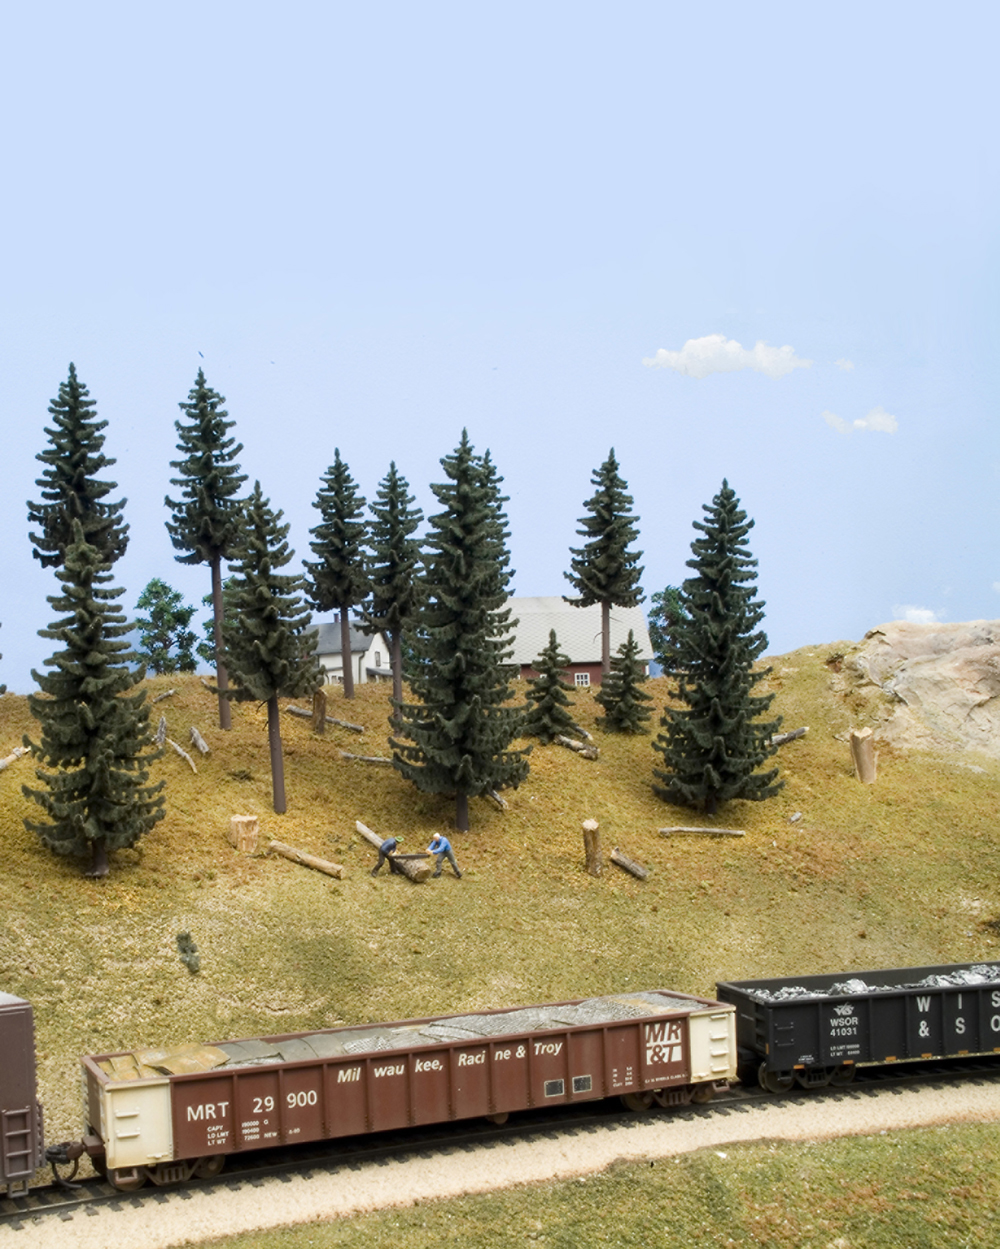 HO scale scene with gondola in foreground, trees behind track, and N scale structures in the distance.